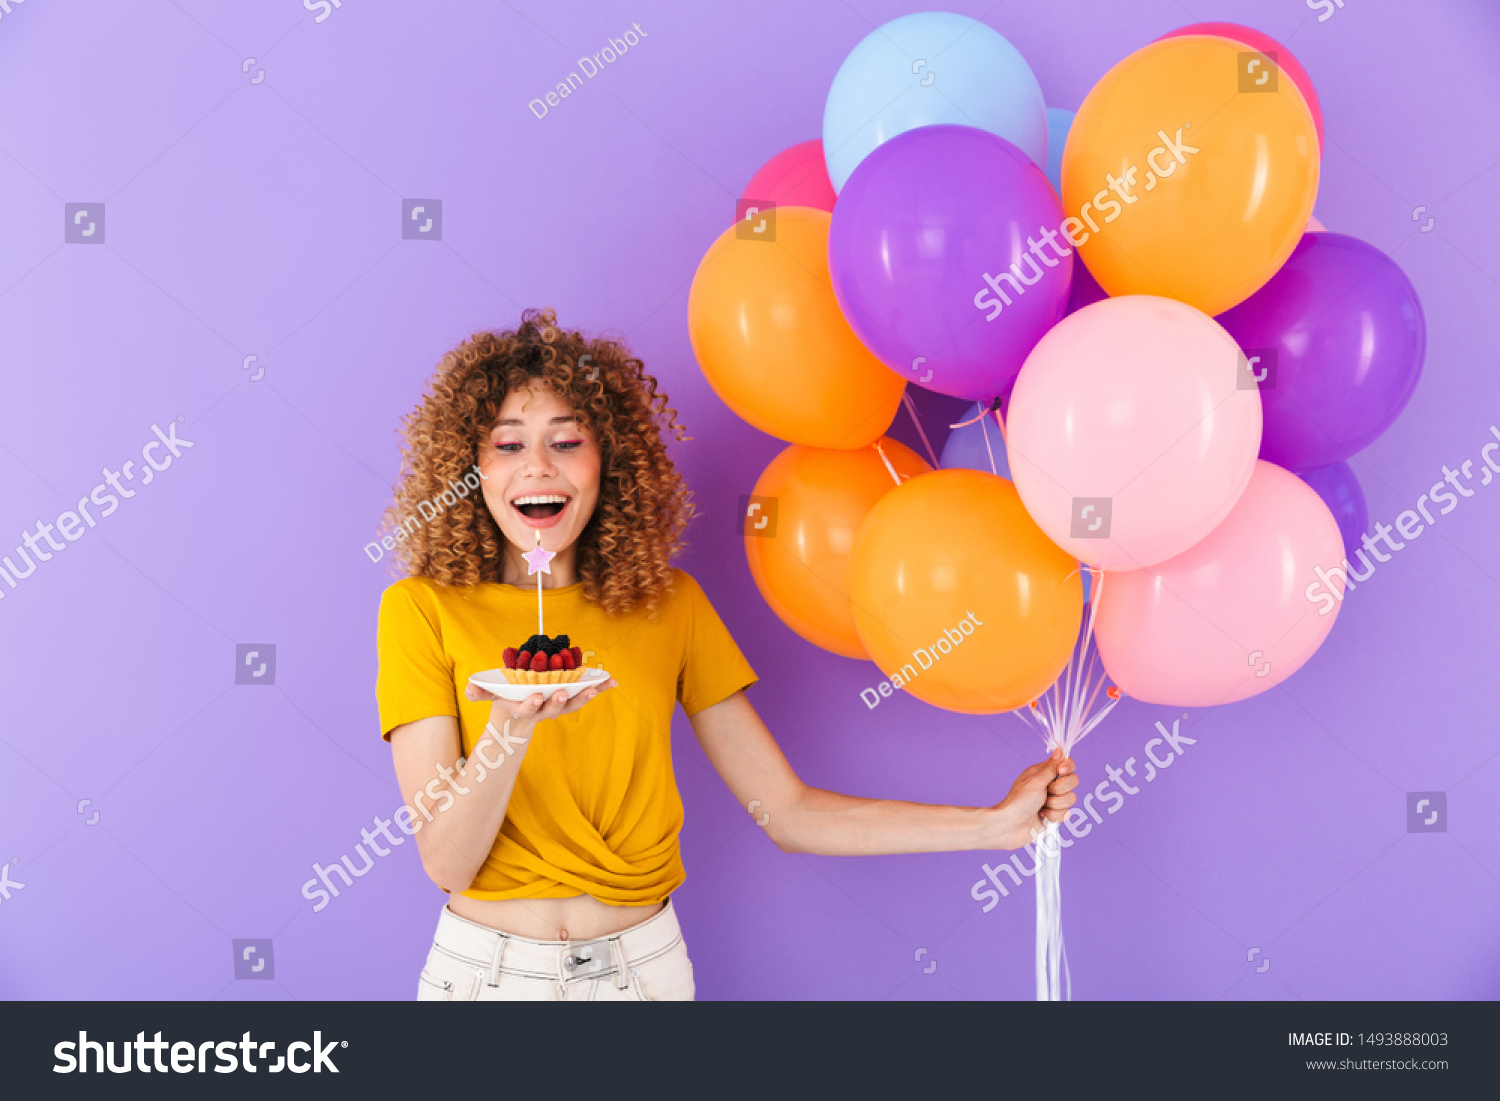 Image of happy young woman celebrating birthday with multicolored air balloons and piece of pie isolated over violet background #1493888003